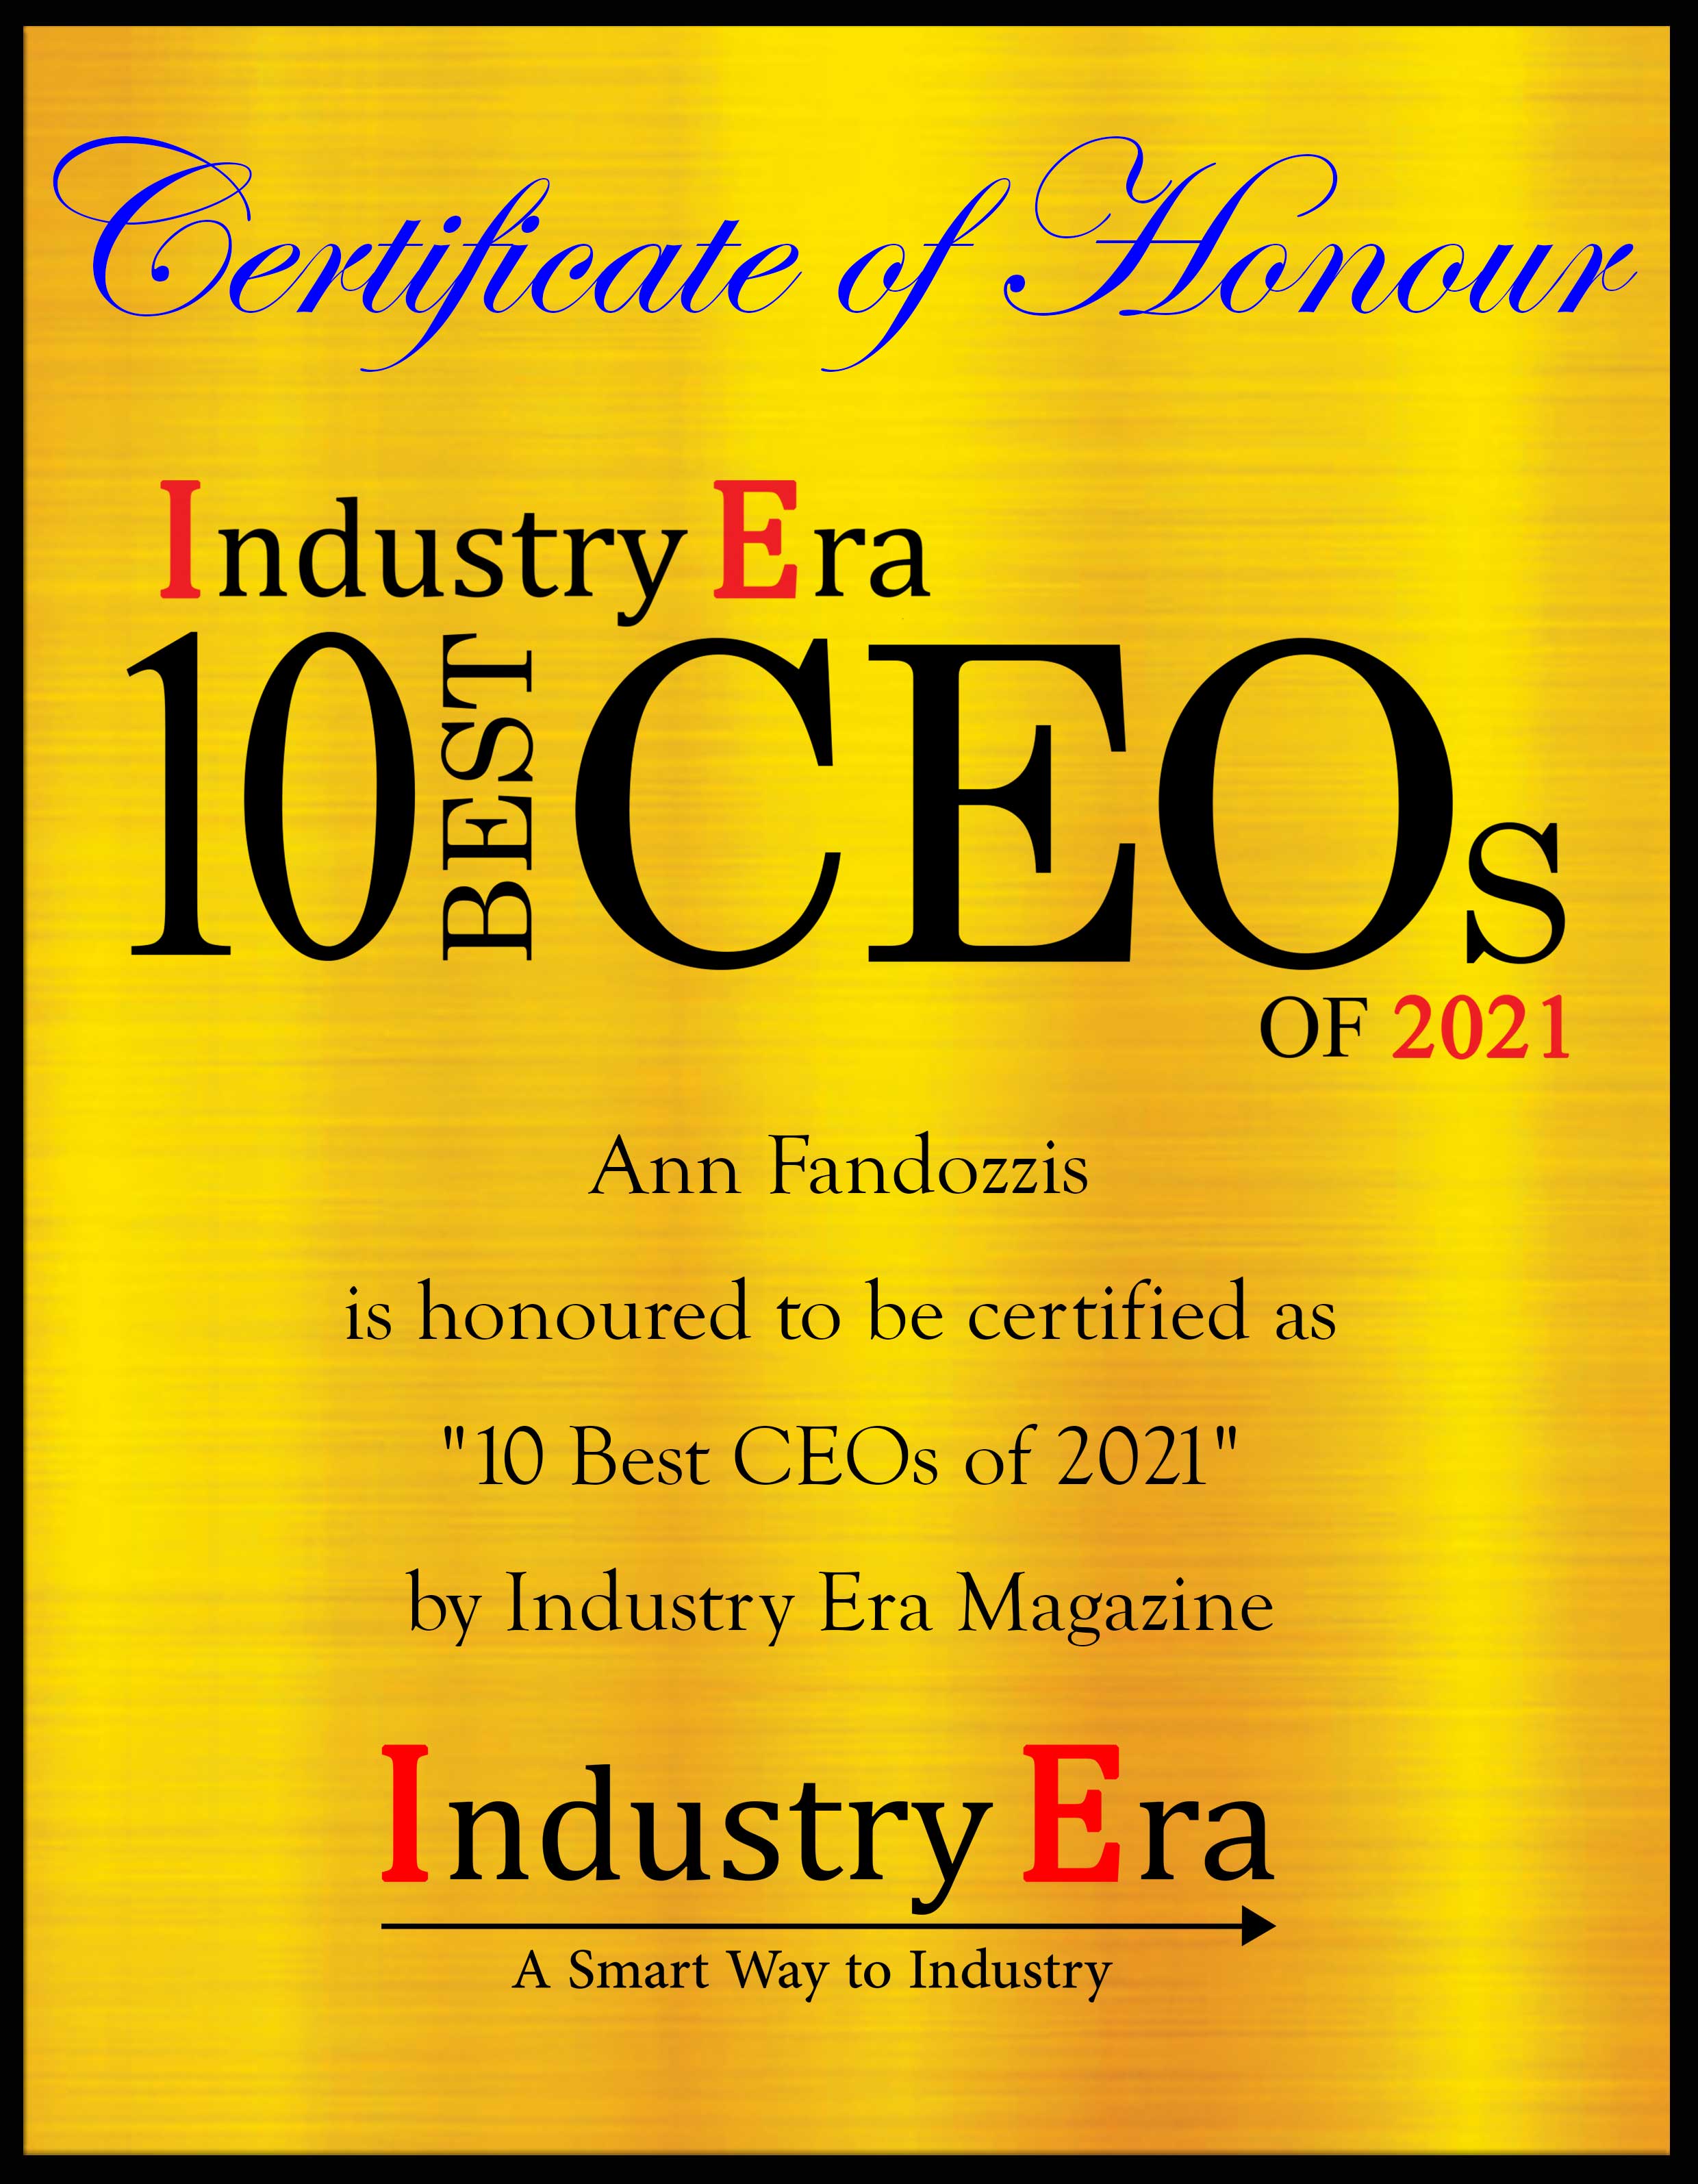 Ann Fandozzi, Chief Executive Officer of Ritchie Bros Certificate